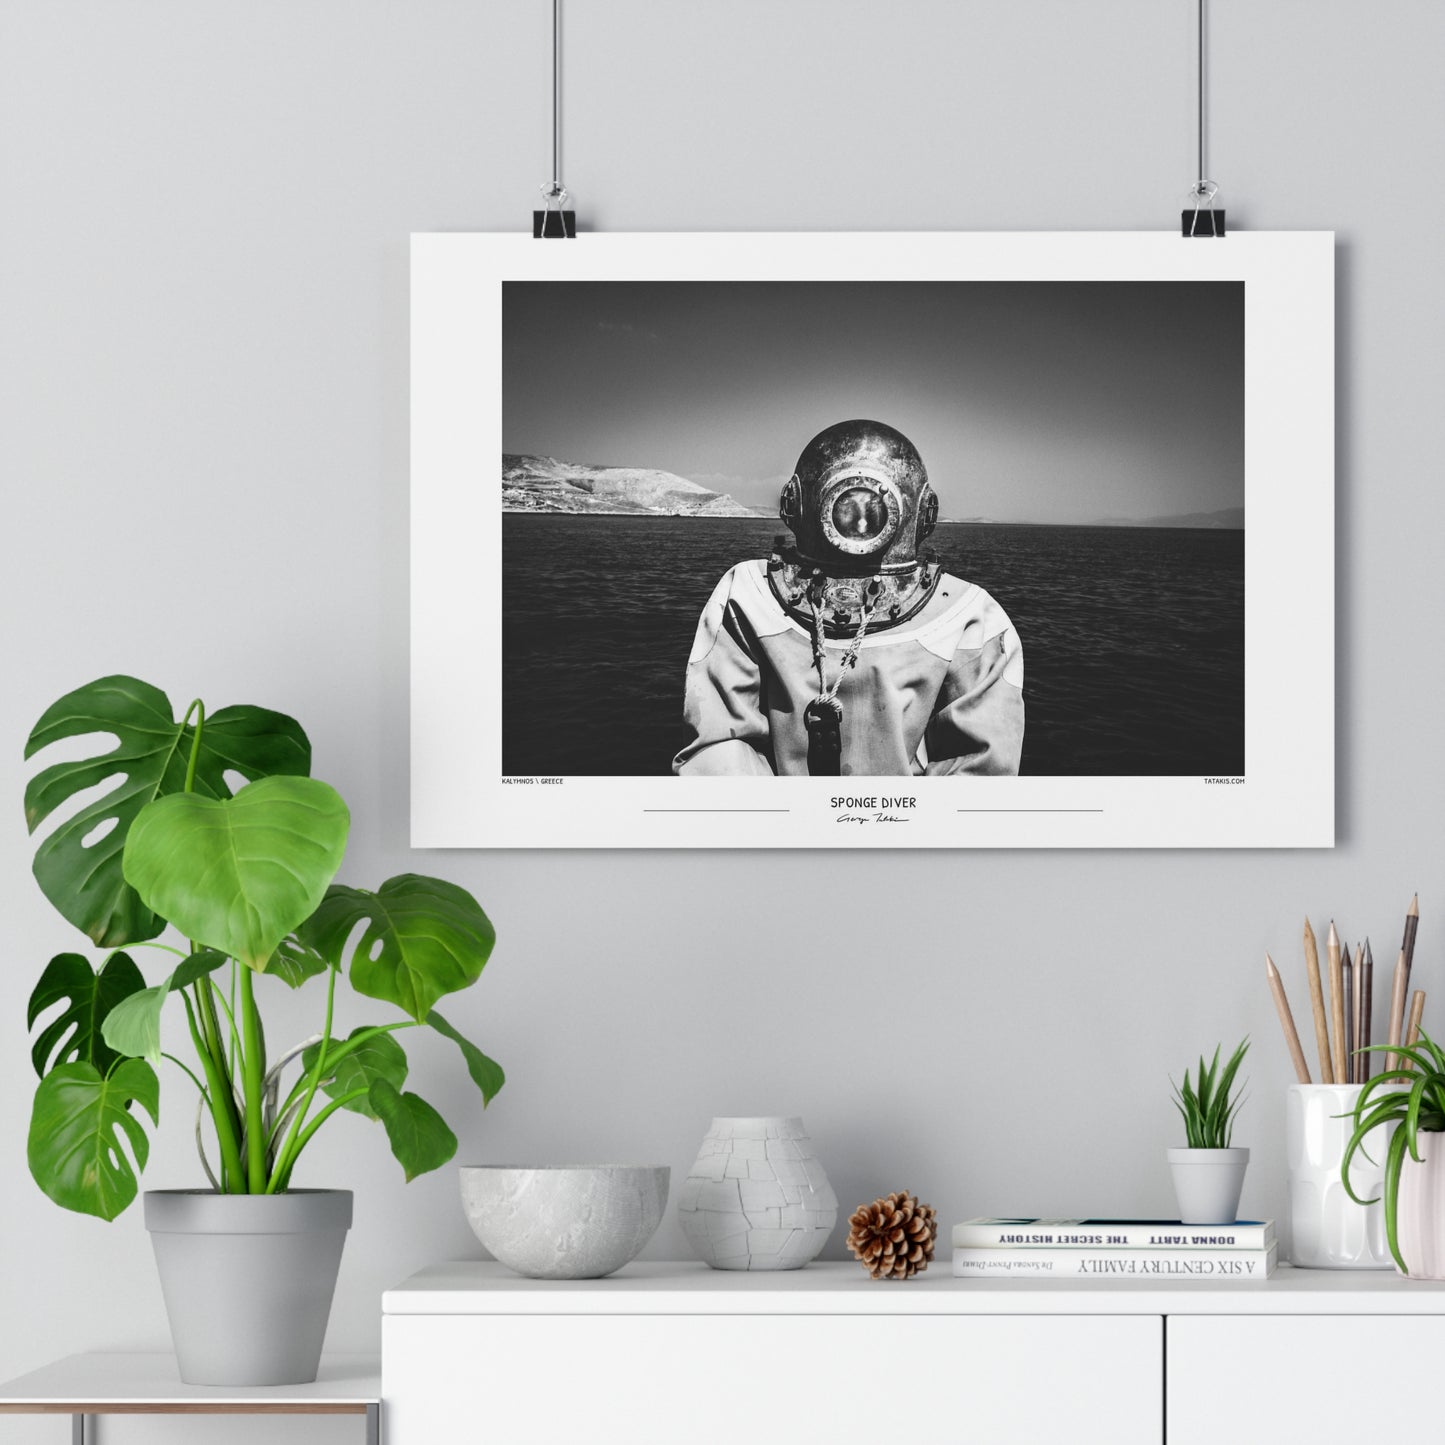 The Sponge Diver | Black-and-White photography Wall Art Poster from Greece, by George Tatakis - small size